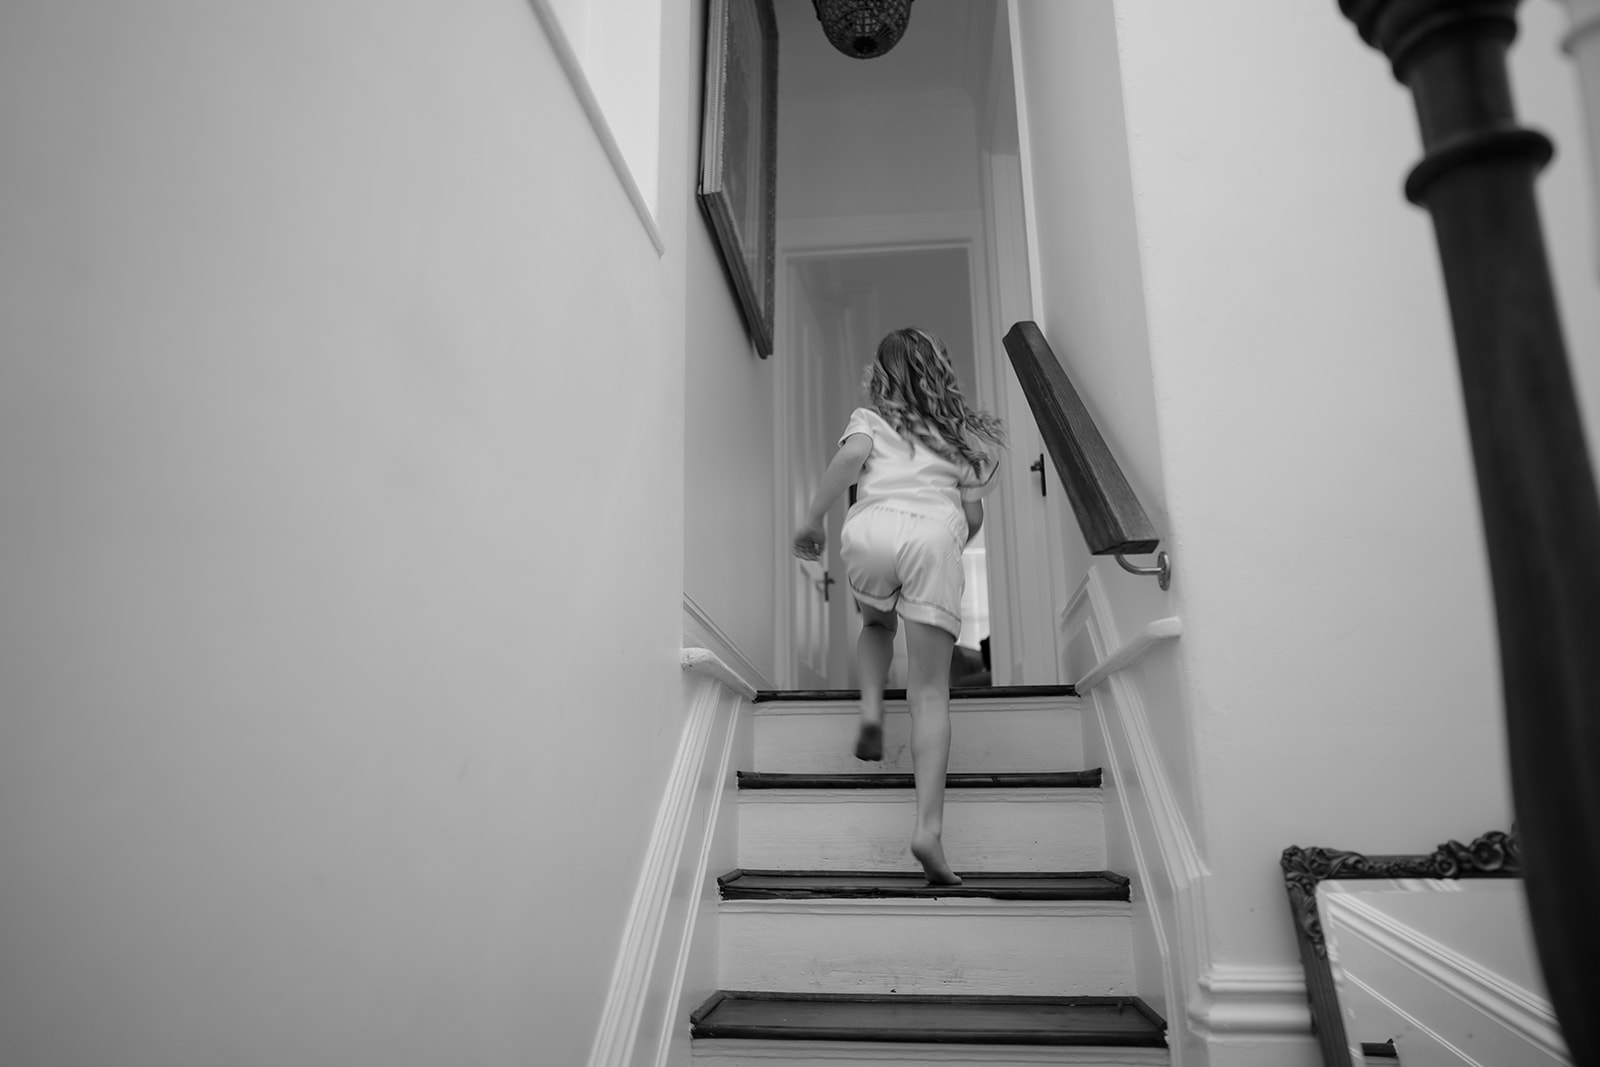 Young flower girl, filled with joy, runs up the staircase